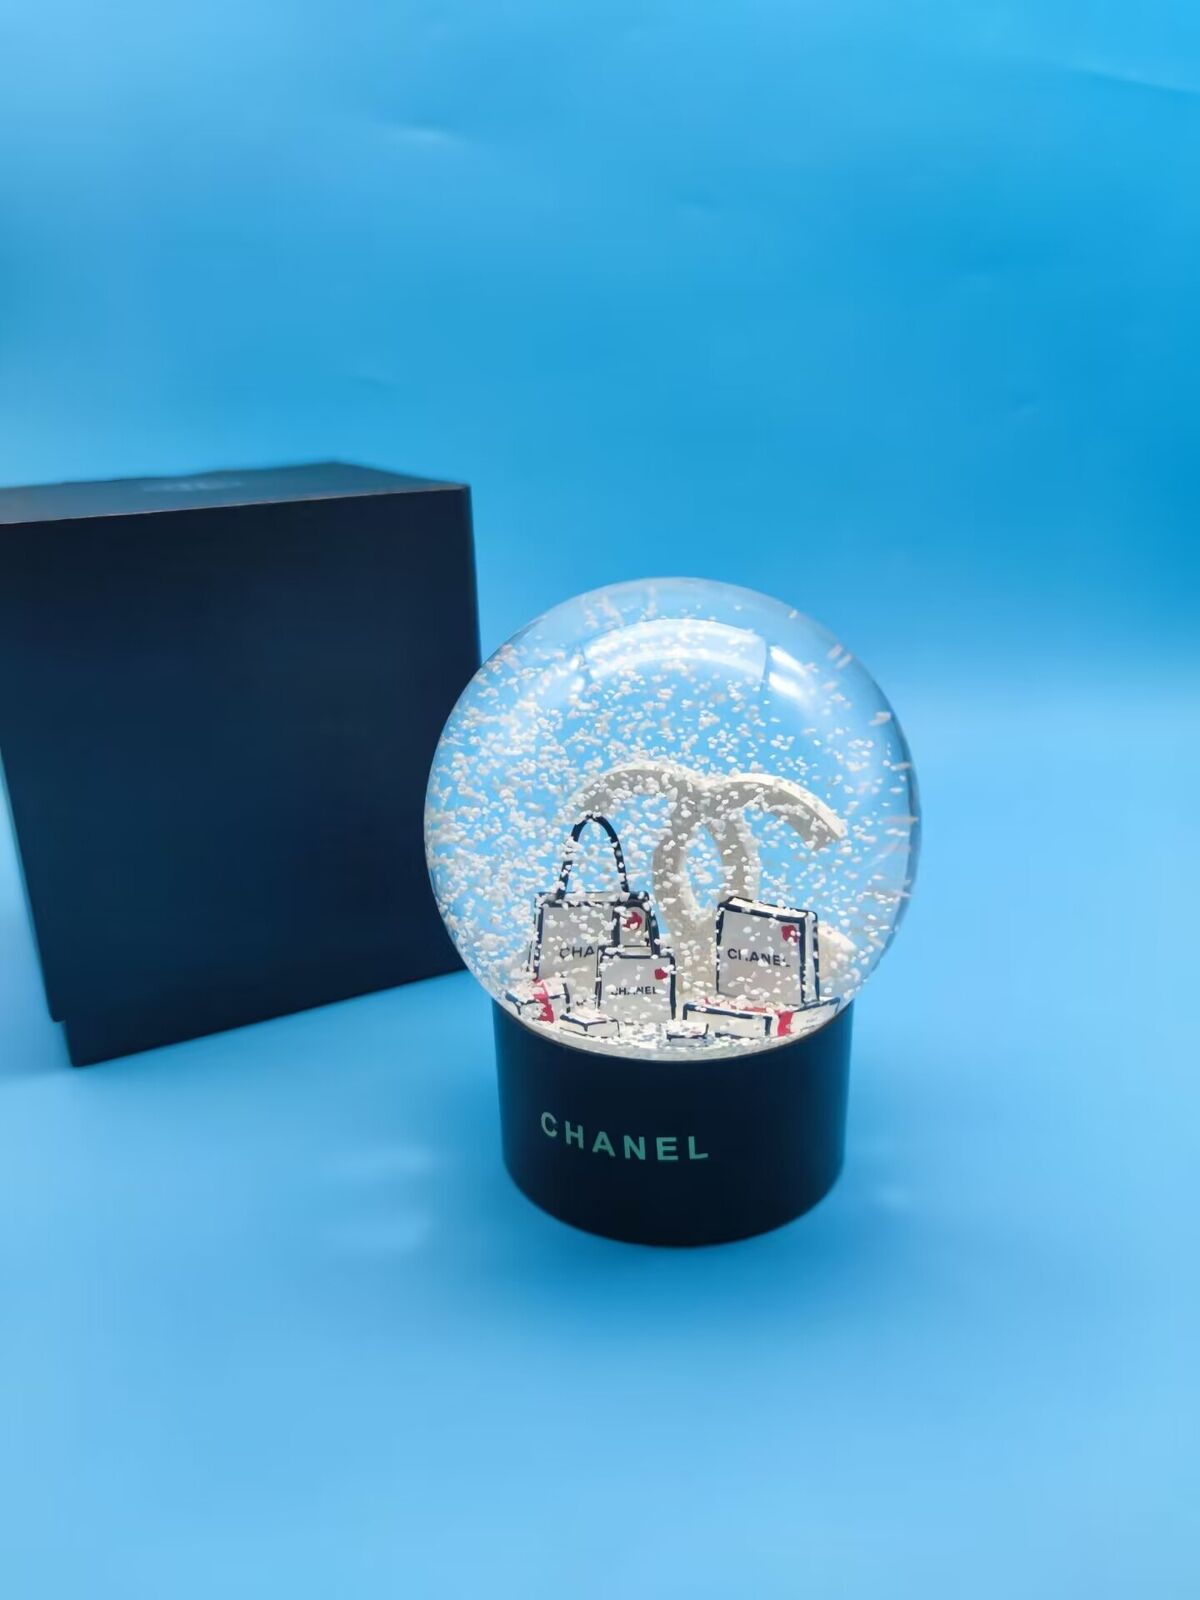  Chanel Snow Globe Large Beautiful Limited Edition??Christmas Gift